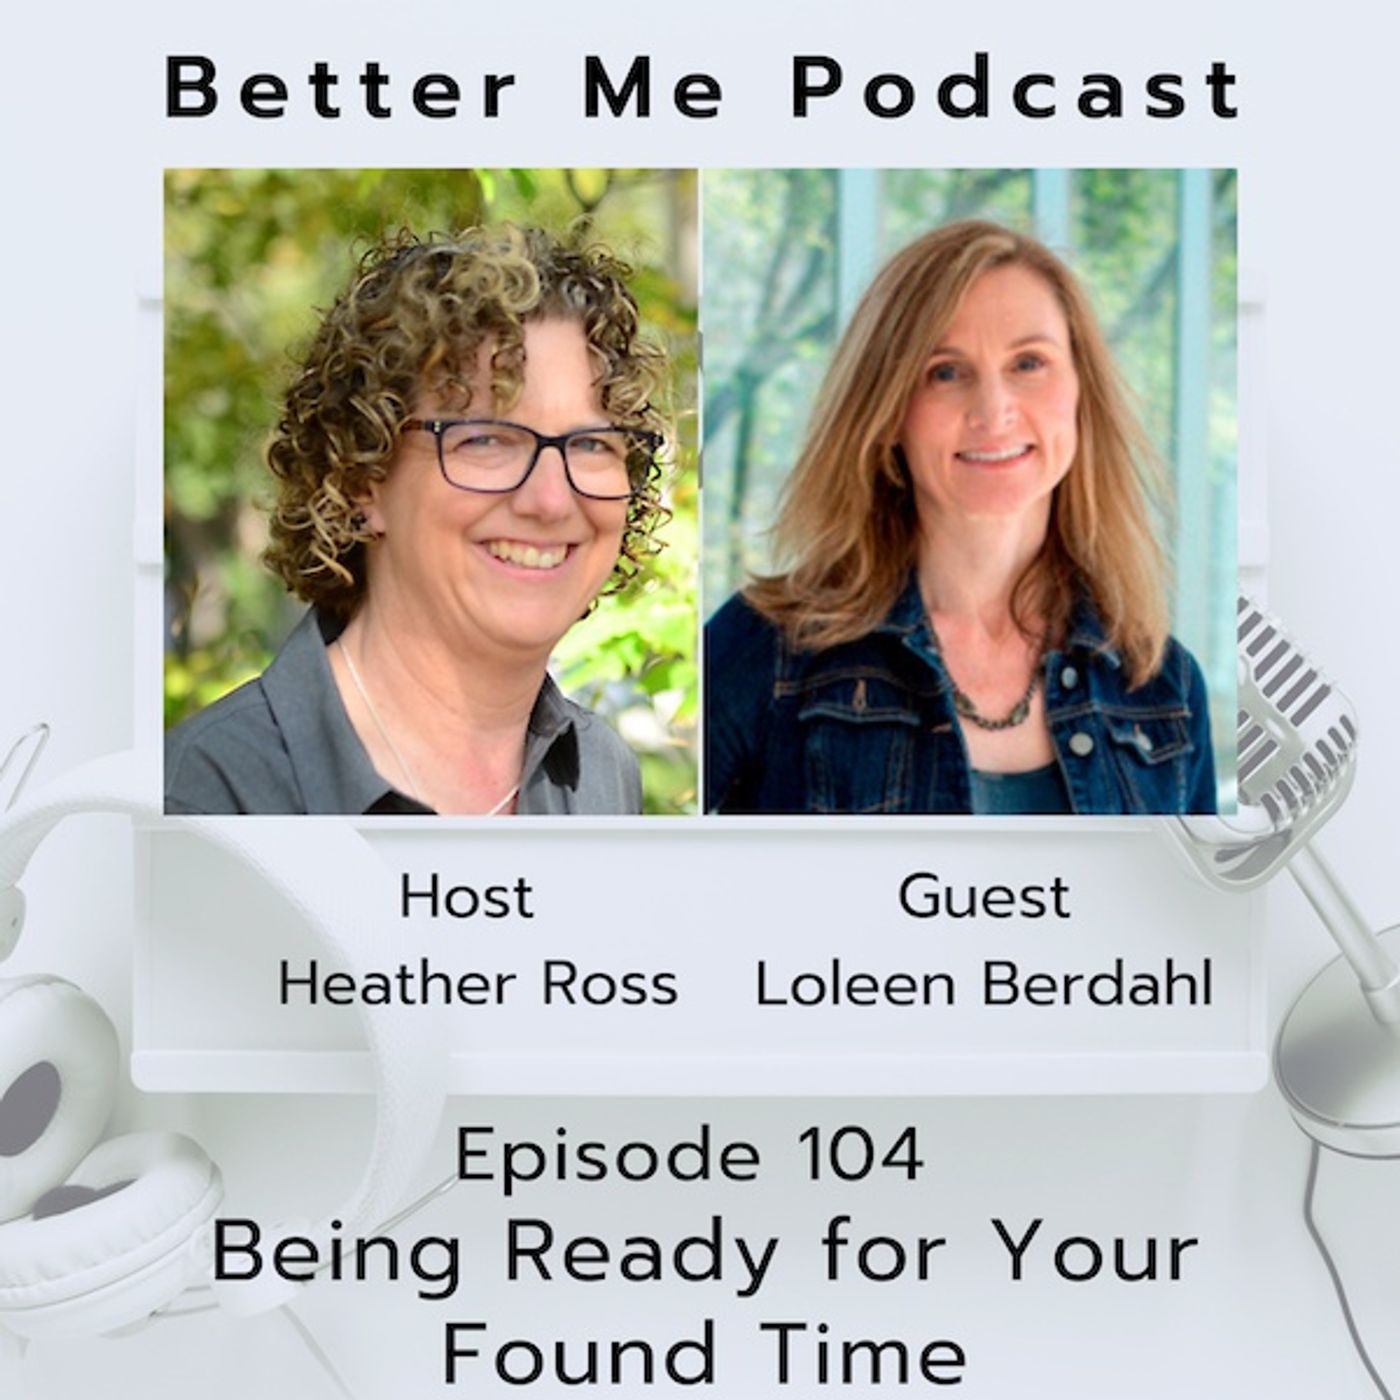 EP 104 Being Ready for Your Found Time (with guest Loleen Berdahl)